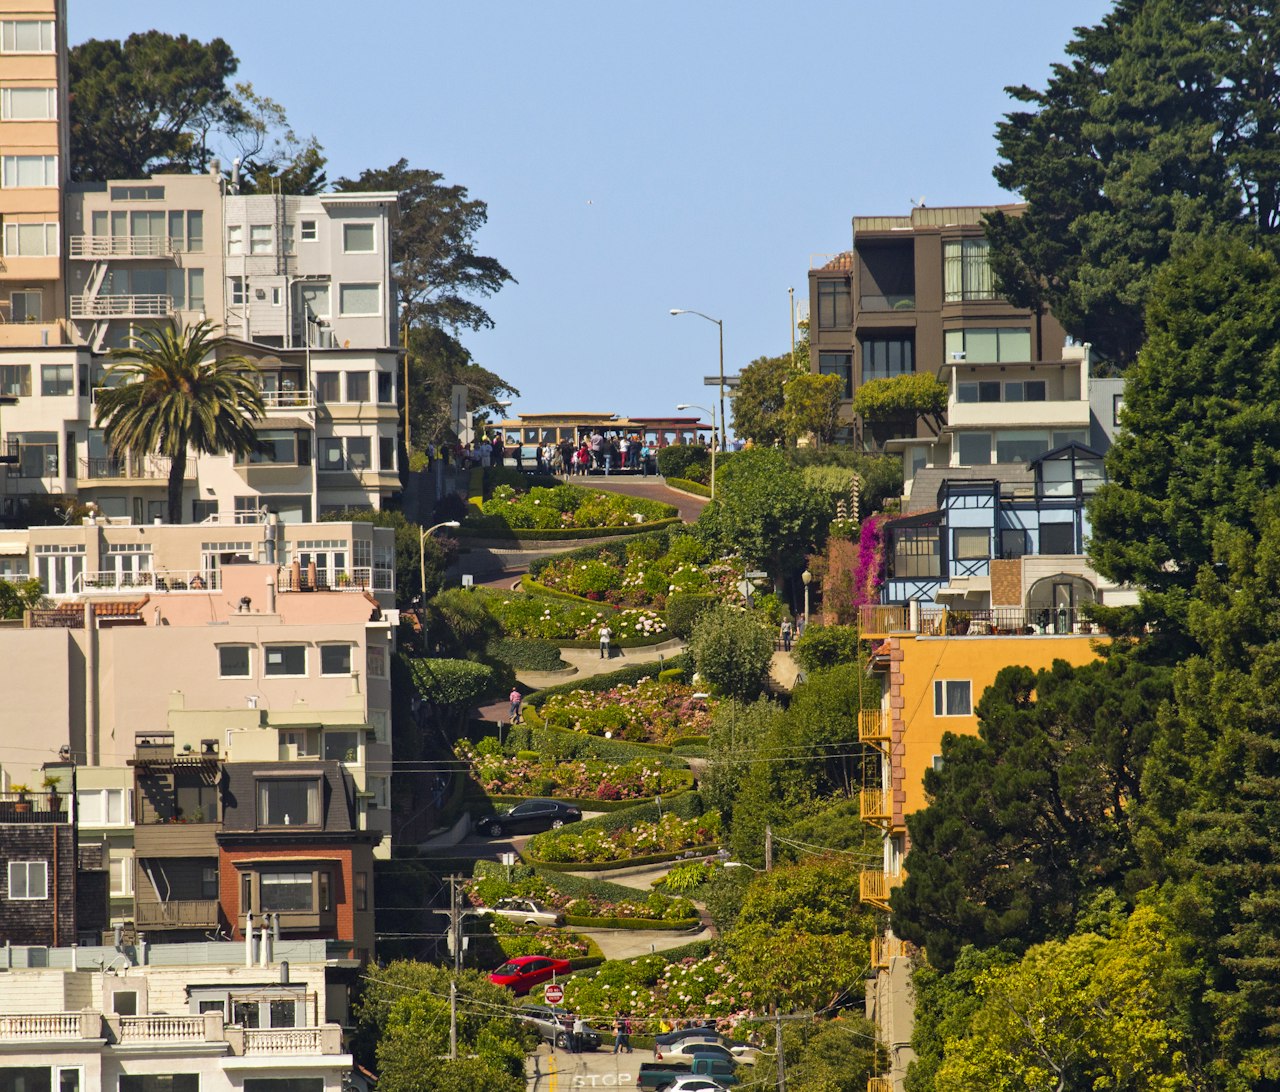 S.F. Bay Area home prices are up after 9 straight months of declines. What’s driving the shift?